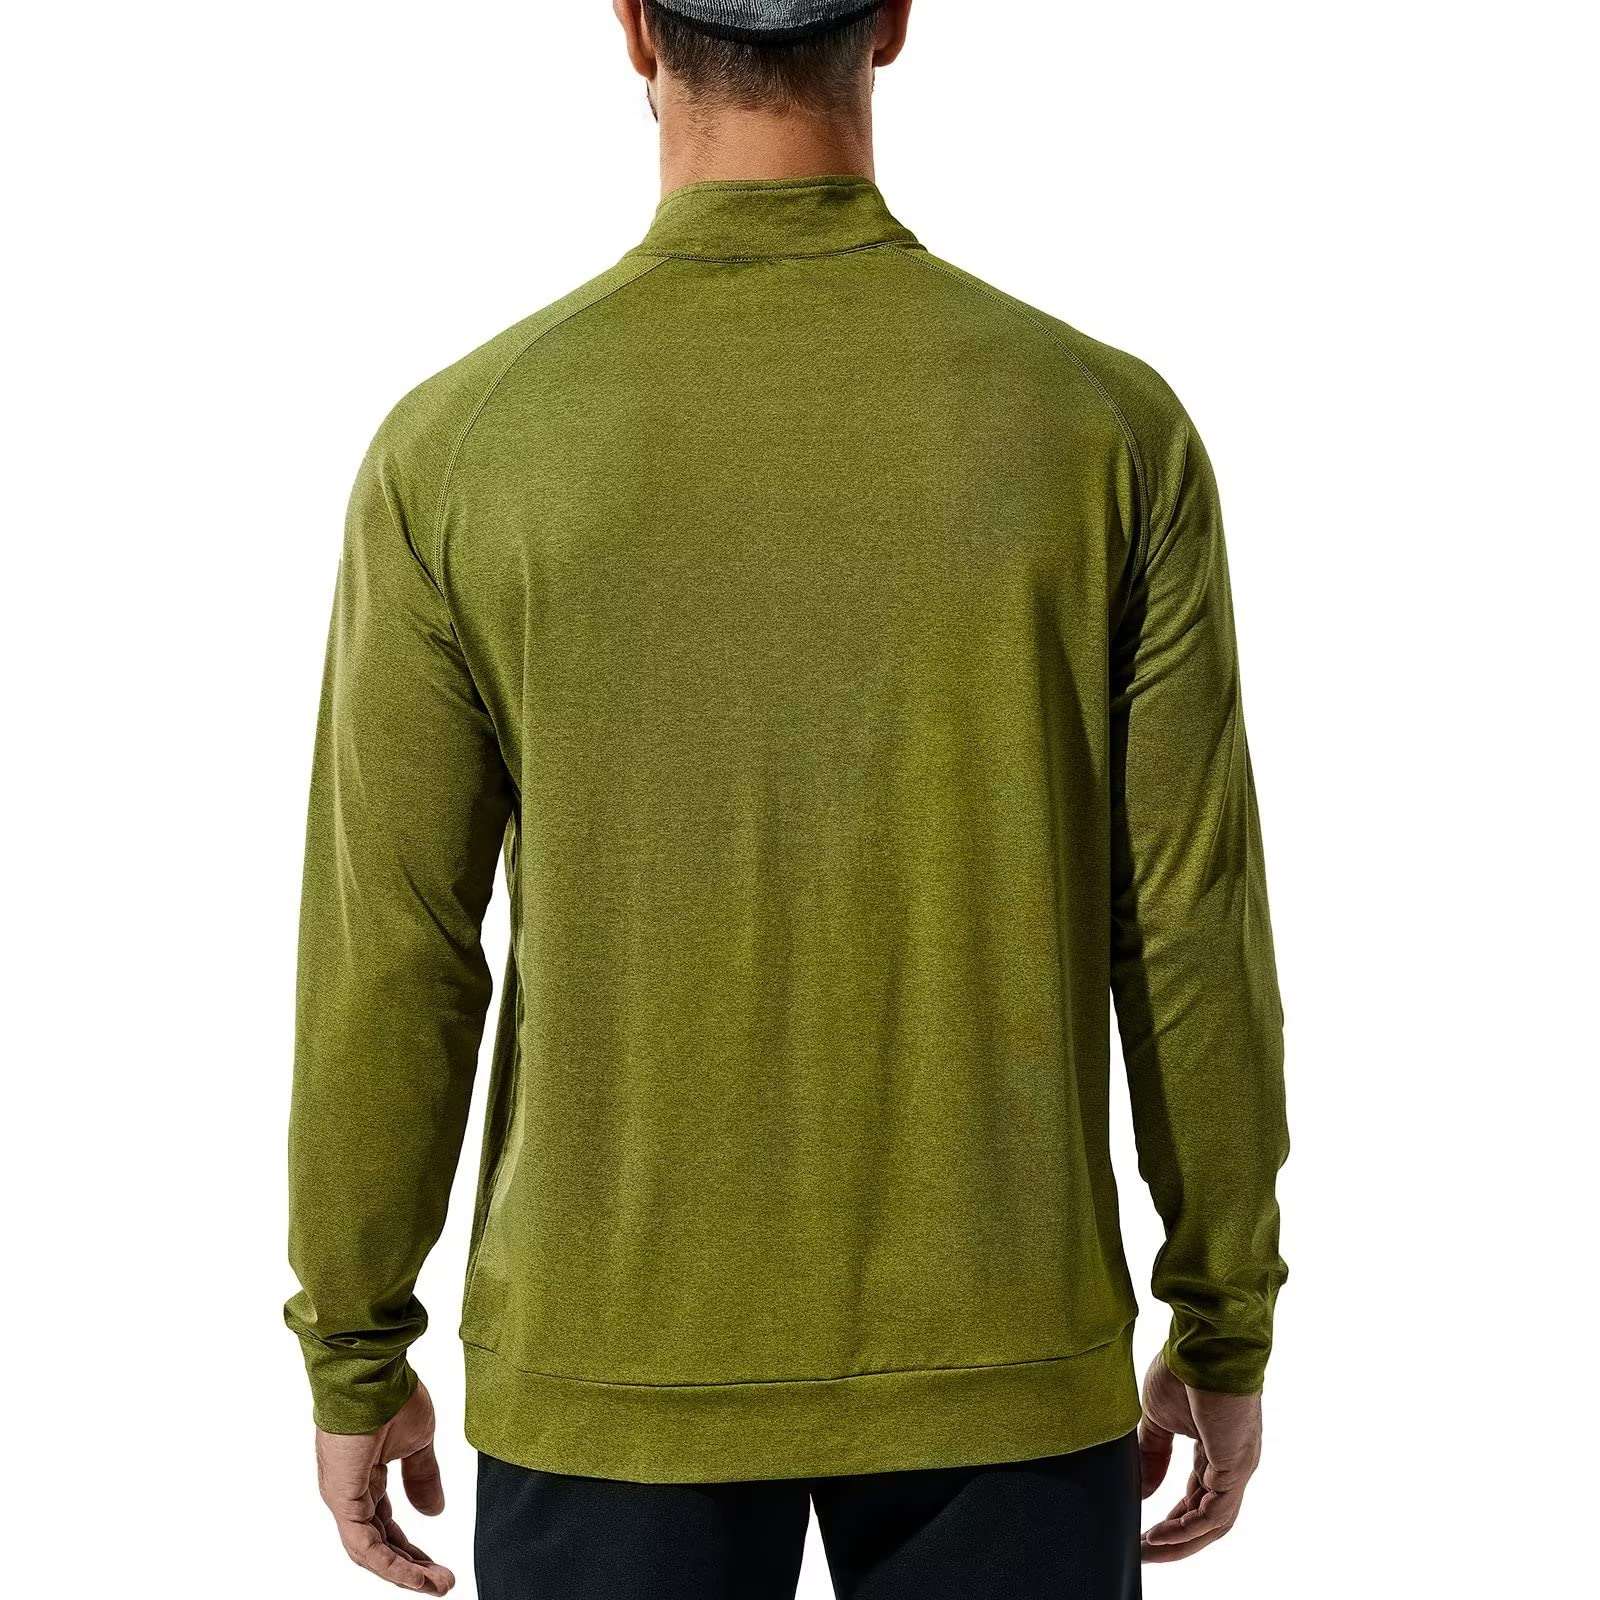 Haimont Men's 1/4 Zip Golf Shirt Long Sleeve Athletic Pullover with  Lightweight Brushed Fleece Lining